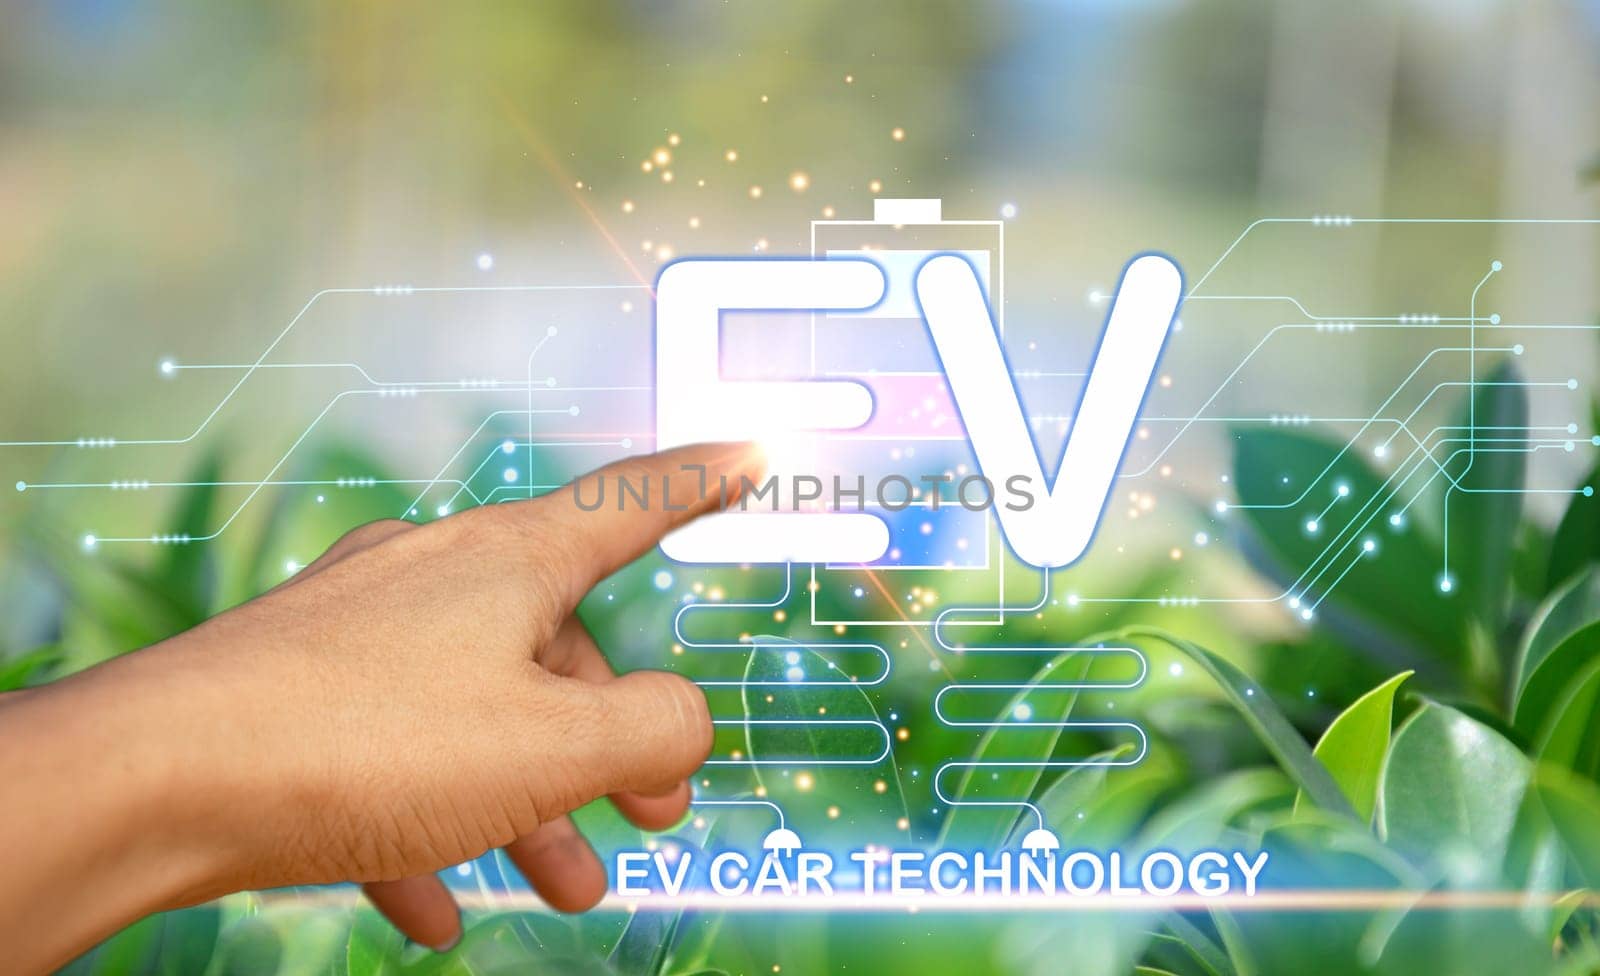 The concept of using EV technology, using electric vehicles, clean energy